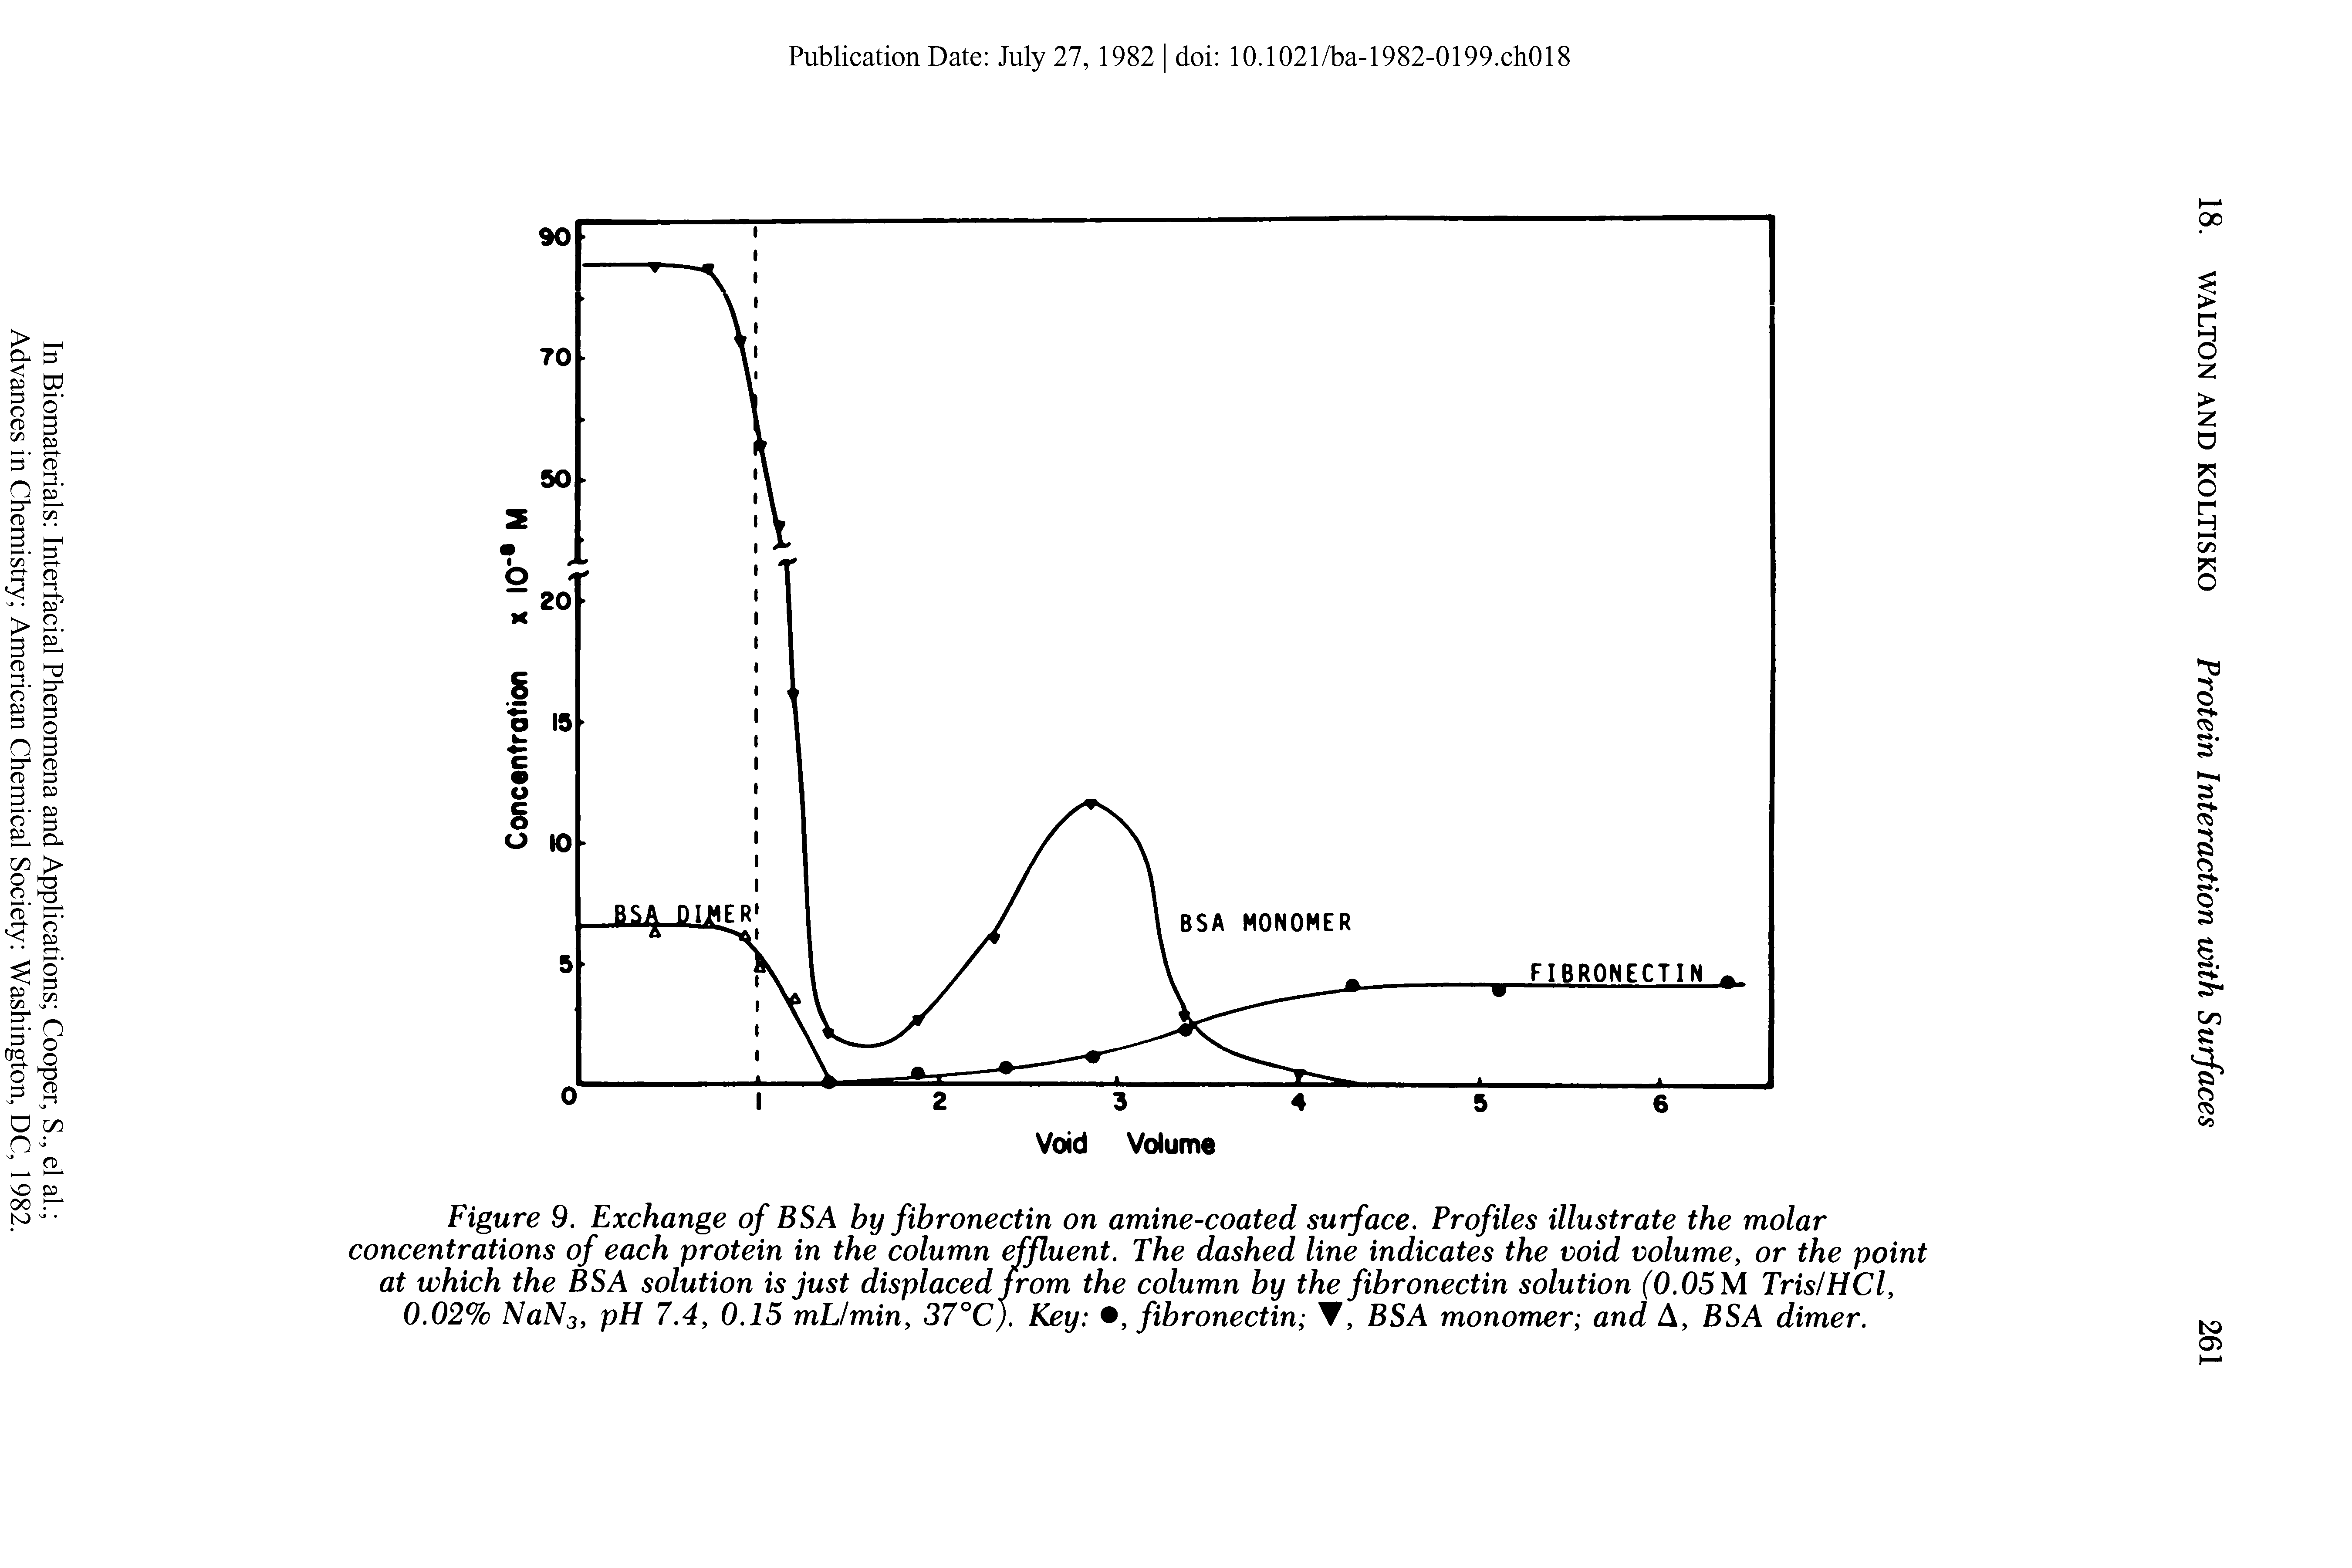 Figure 9. Exchange of BSA by fibronectin on amine-coated surface. Profiles illustrate the molar concentrations of each protein in the column effluent. The dashed line indicates the void volume, or the point at which the BSA solution is just displaced from the column by the fibronectin solution (0.05 M Tris/HCl, 0.02% NaN3, pH 7.4, 0.15 mL/min, 37°C). Key , fibronectin T, BSA monomer and A, BSA dimer.